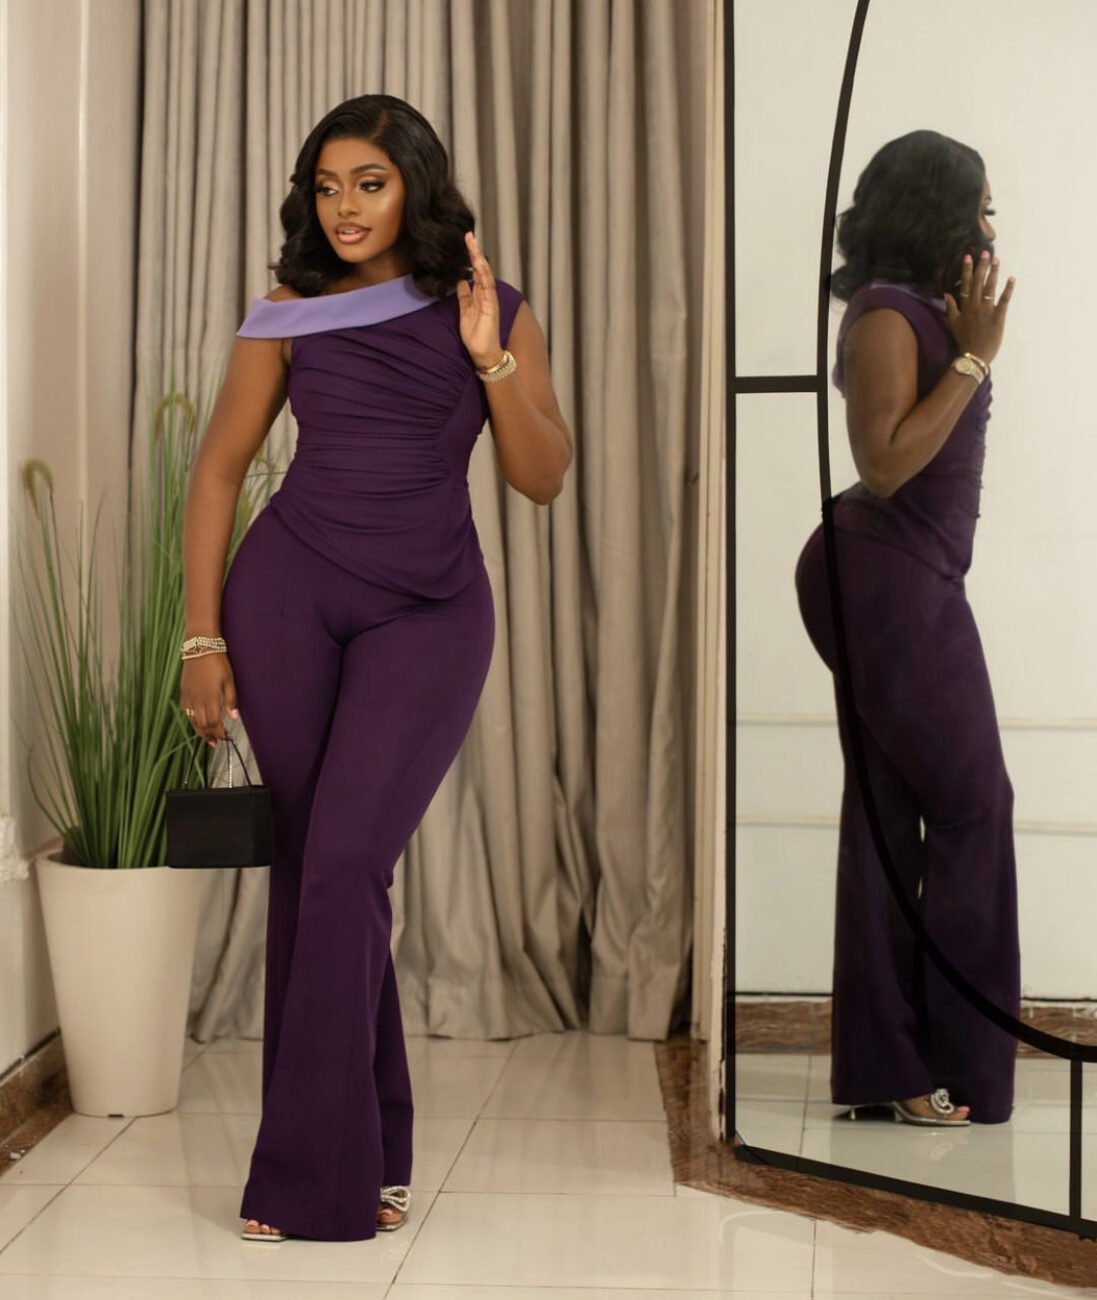 Ama Reginald stunning in form-fitting clothes that accentuate her figure, ahead of fashion trends.